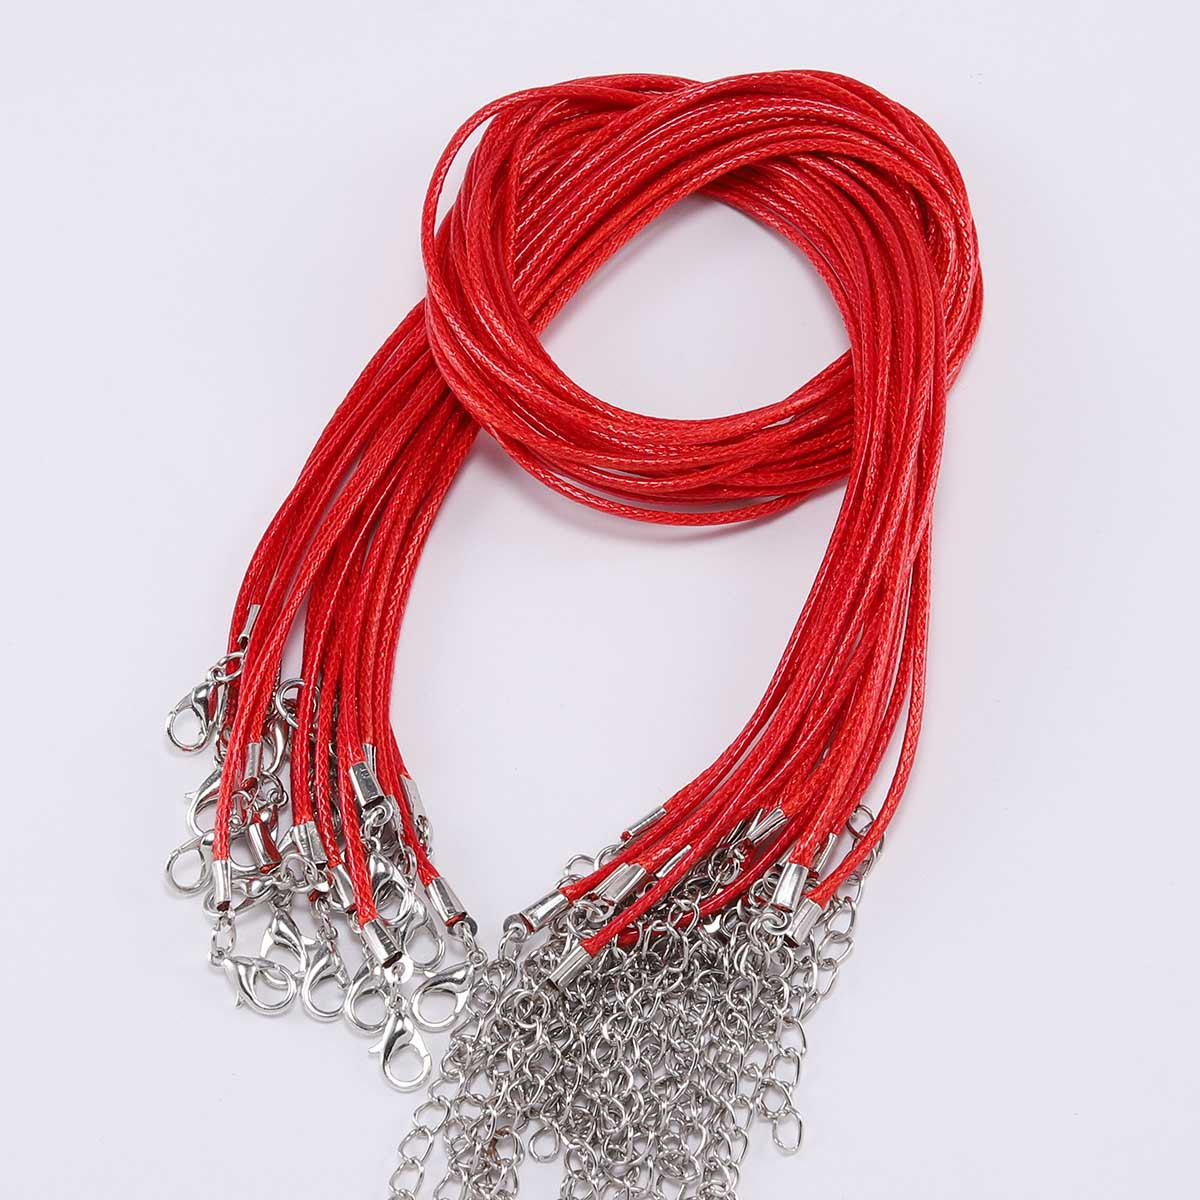 10pcs 45mm+5mm Crystal Pendant Cords Wax Leather Cords And Jewelry